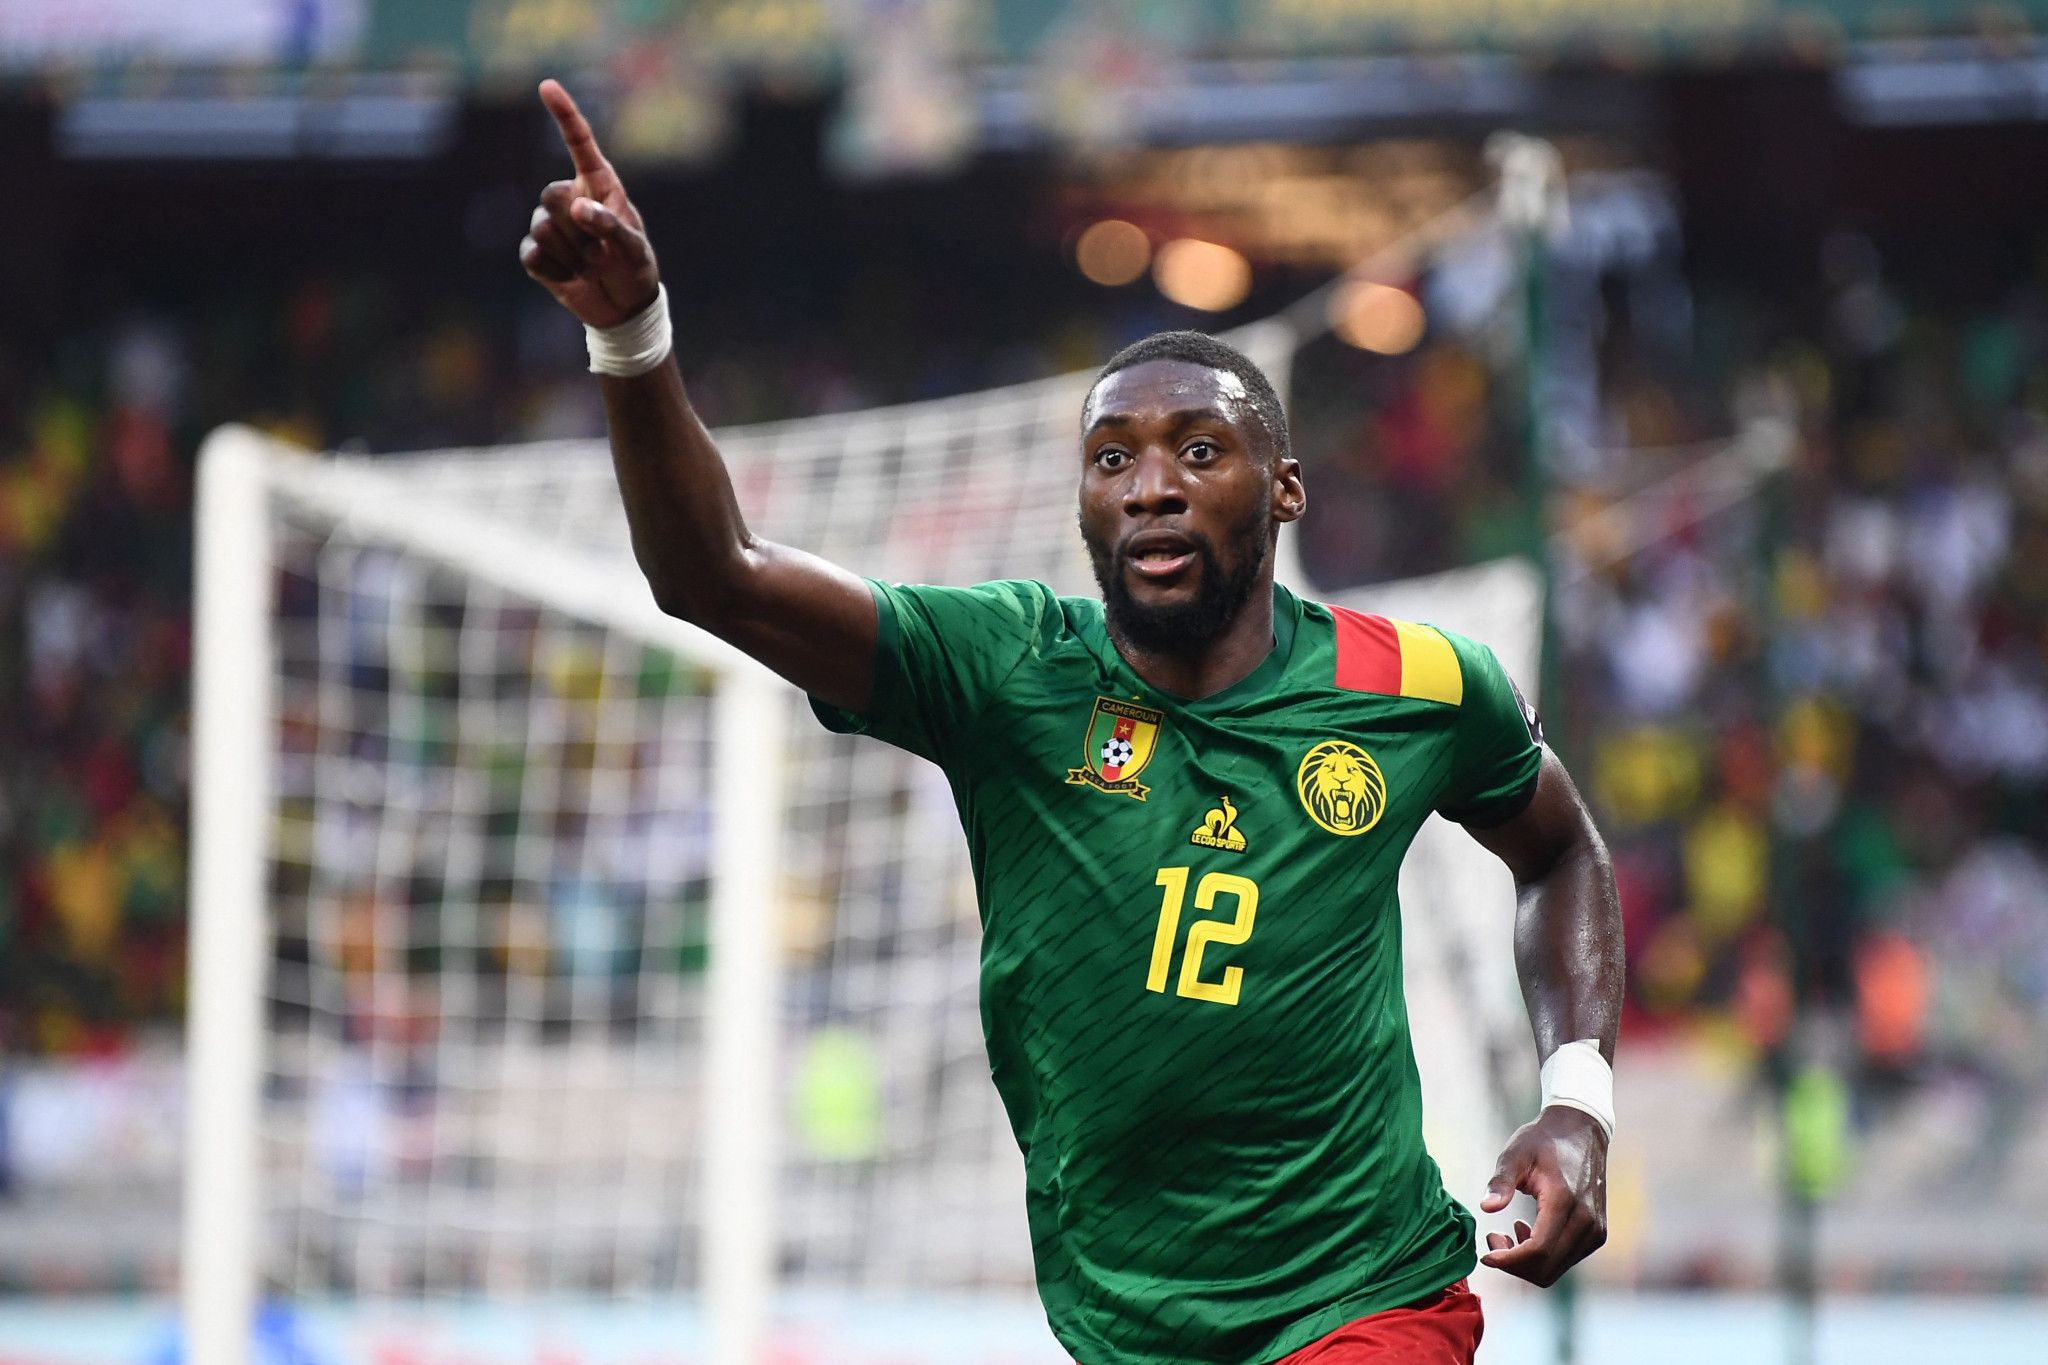 Hosts Cameroon cruise past The Gambia and into Africa Cup of Nations semi-finals